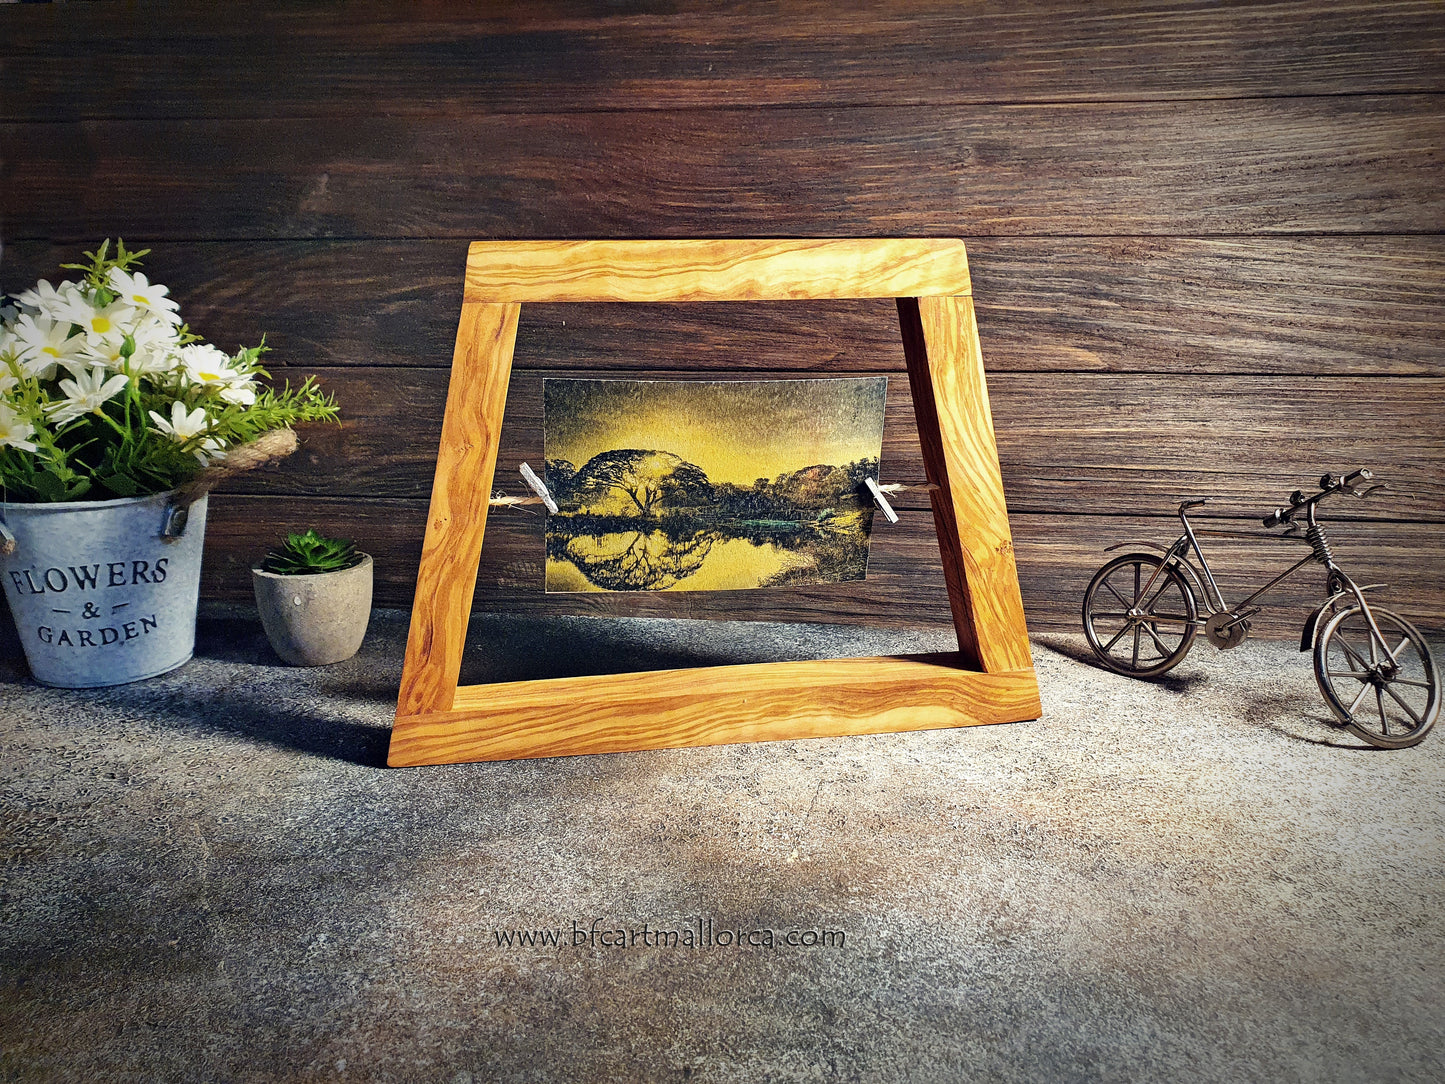 Original handmade olive wood photo frames, with our trapezoid design